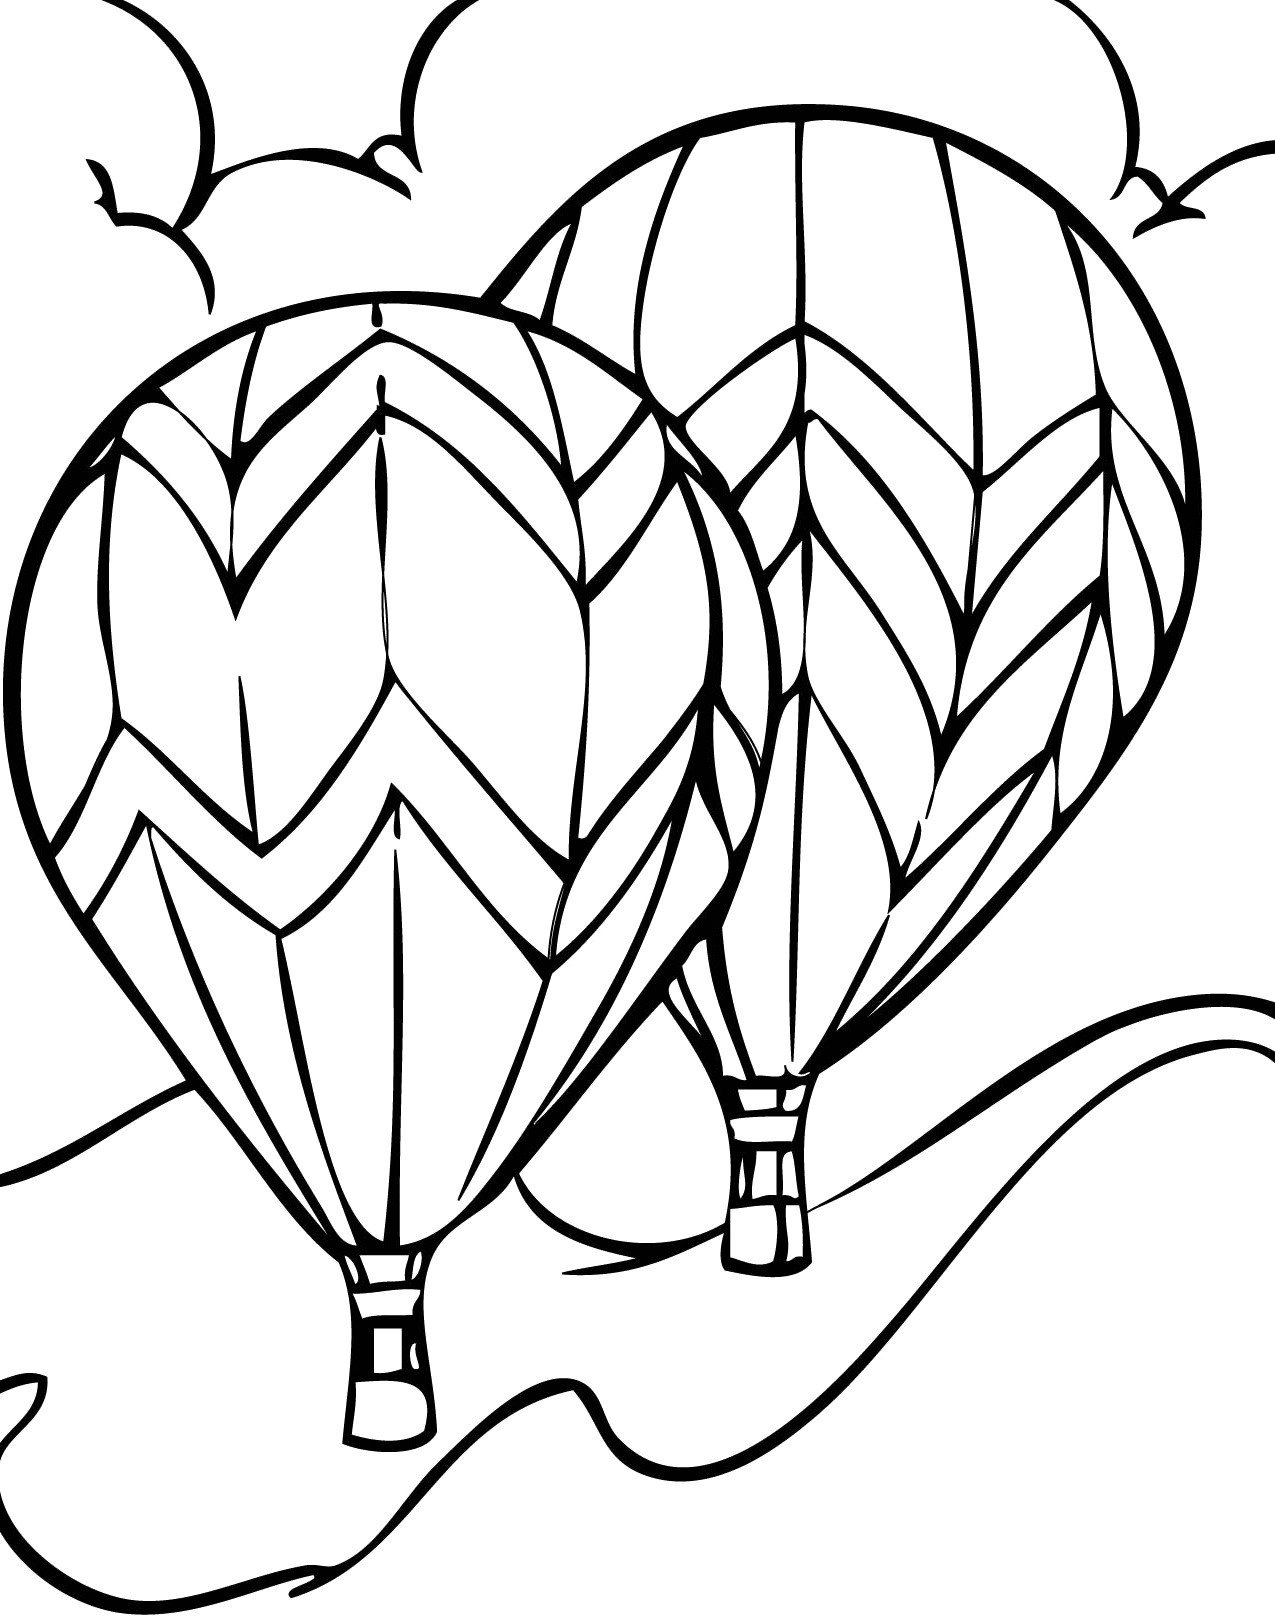 How To Print Coloring Pages Collection How To Print Ou Big Coloring Pages Pictures